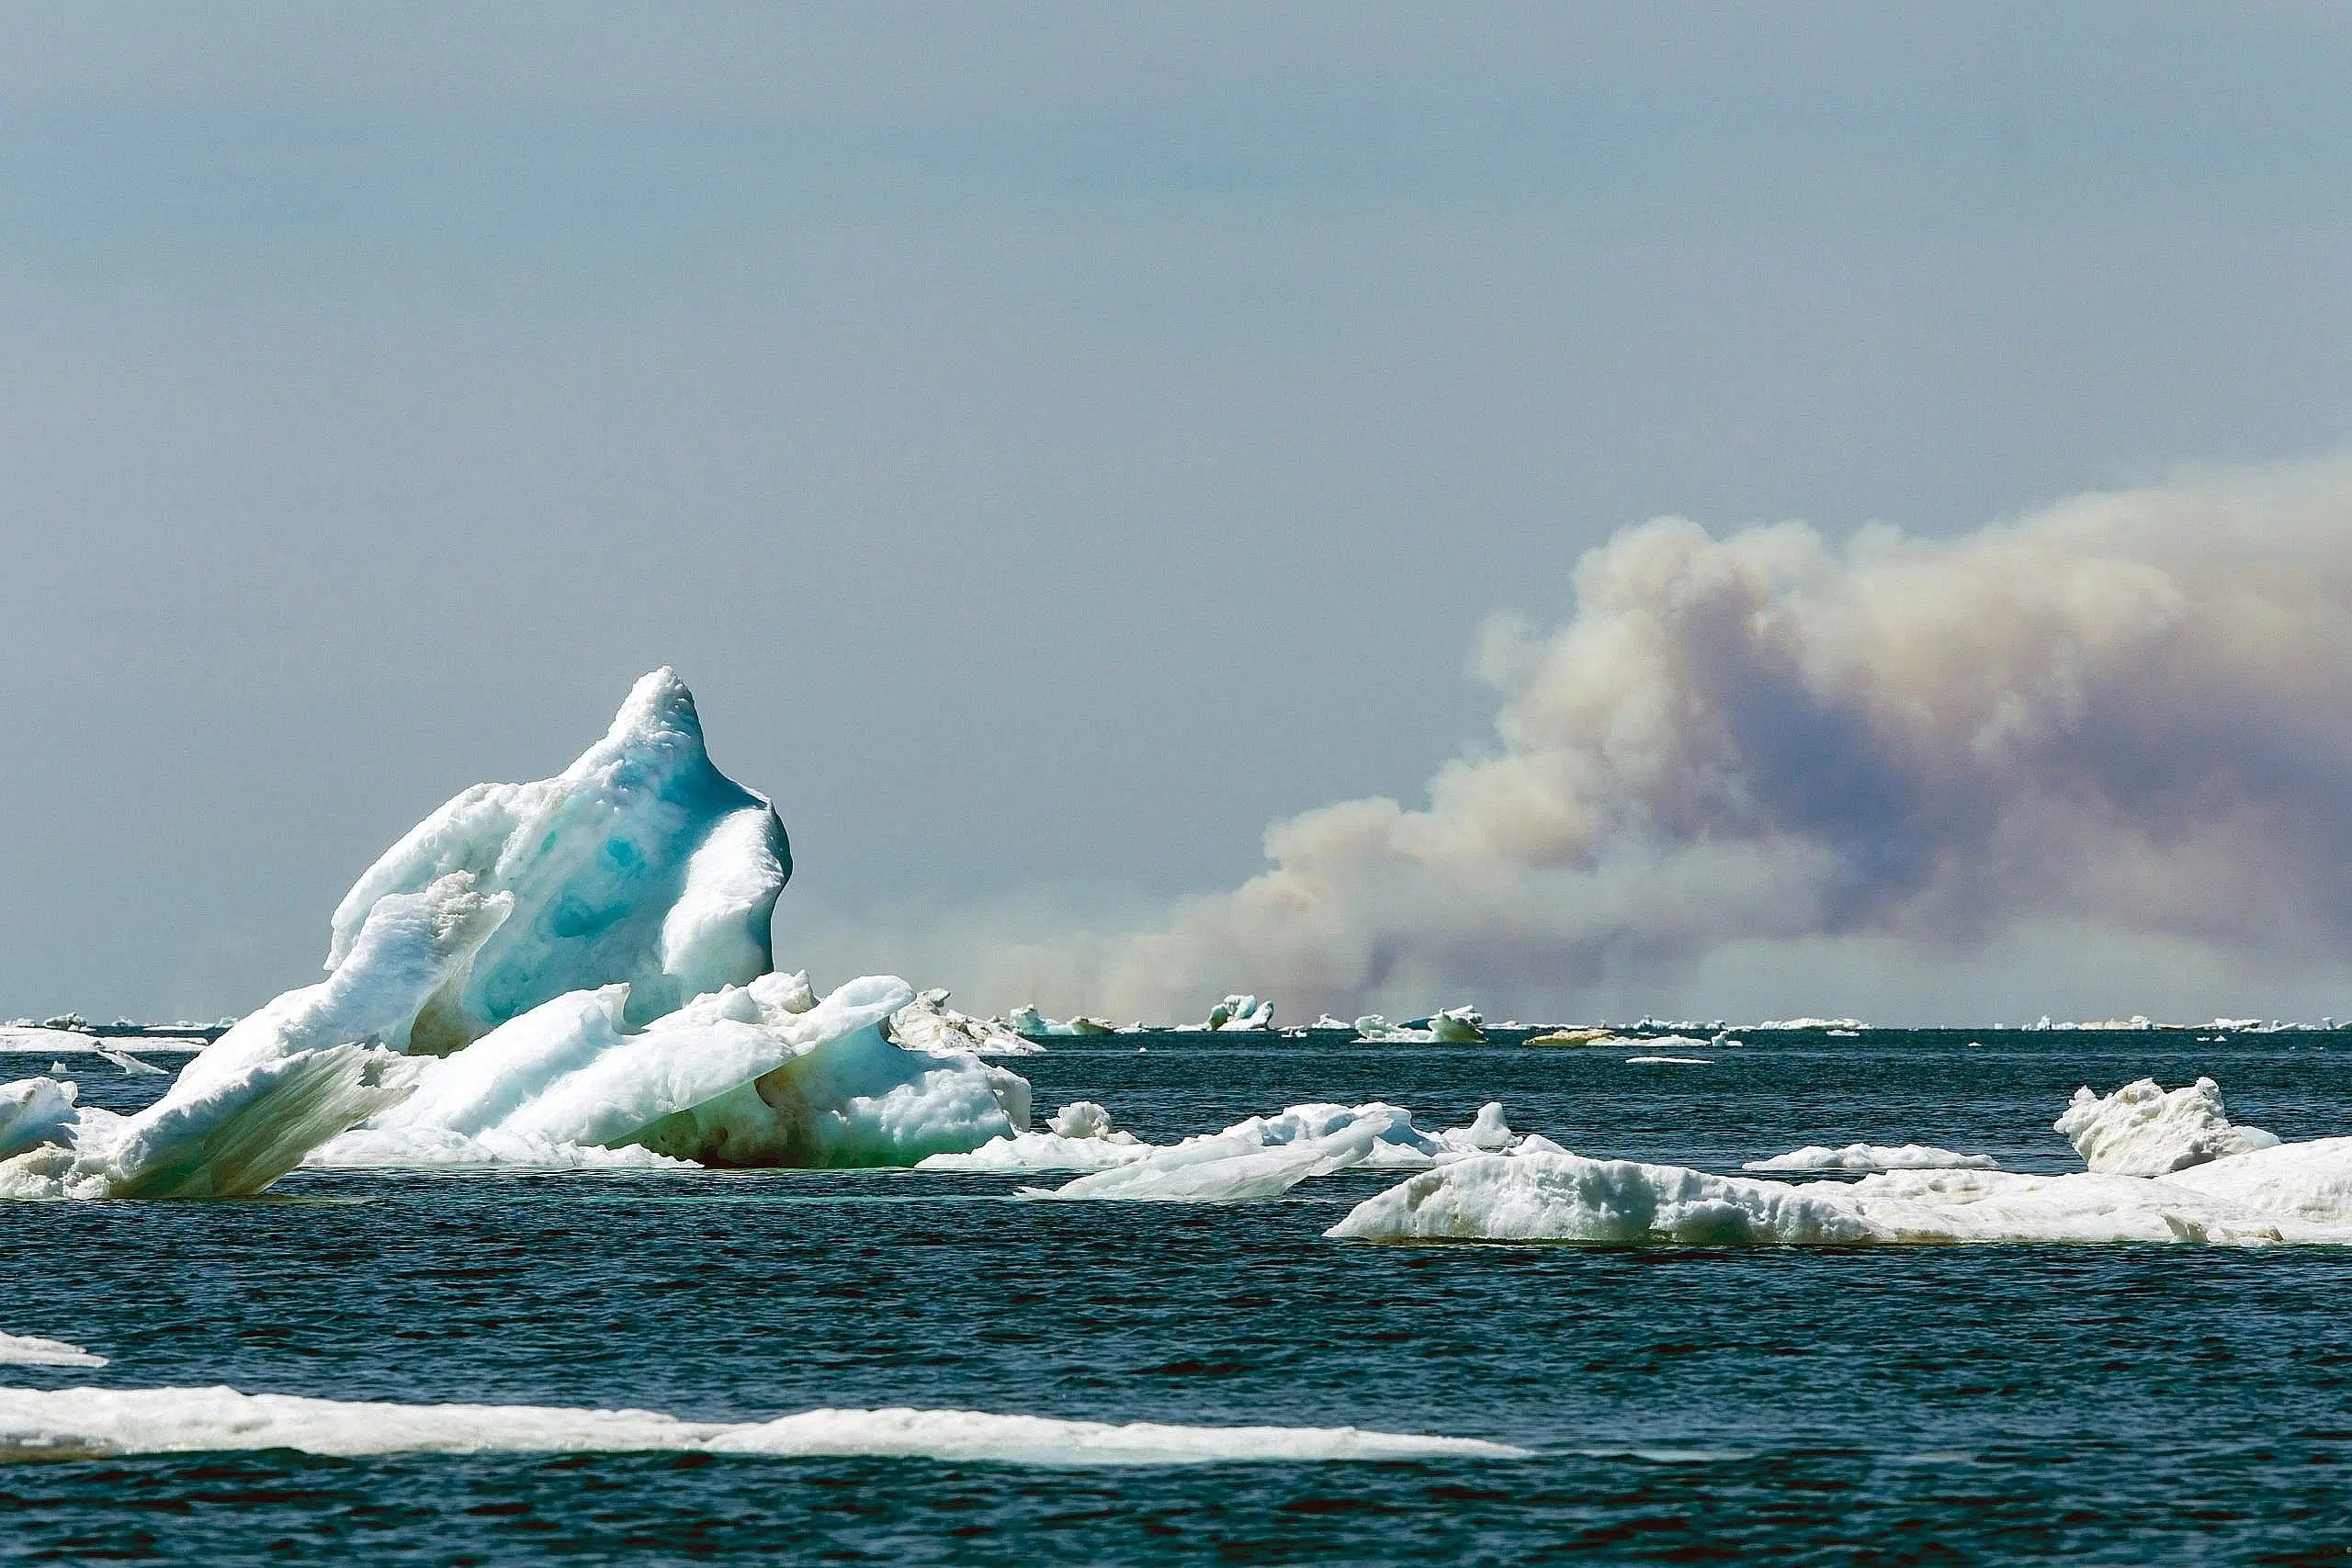 Manitoba: Wildfires in Canada have begun accelerating ice melt in Hudson Bay thanks to a feedback loop: soot, drifting from fires, settles on the surface of ice and darkens it, causing it to absorb more heat. In 2060, the Prairies will face water scarcity due to shrinking glaciers and snowpacks that feed the regionâs cities and farms.